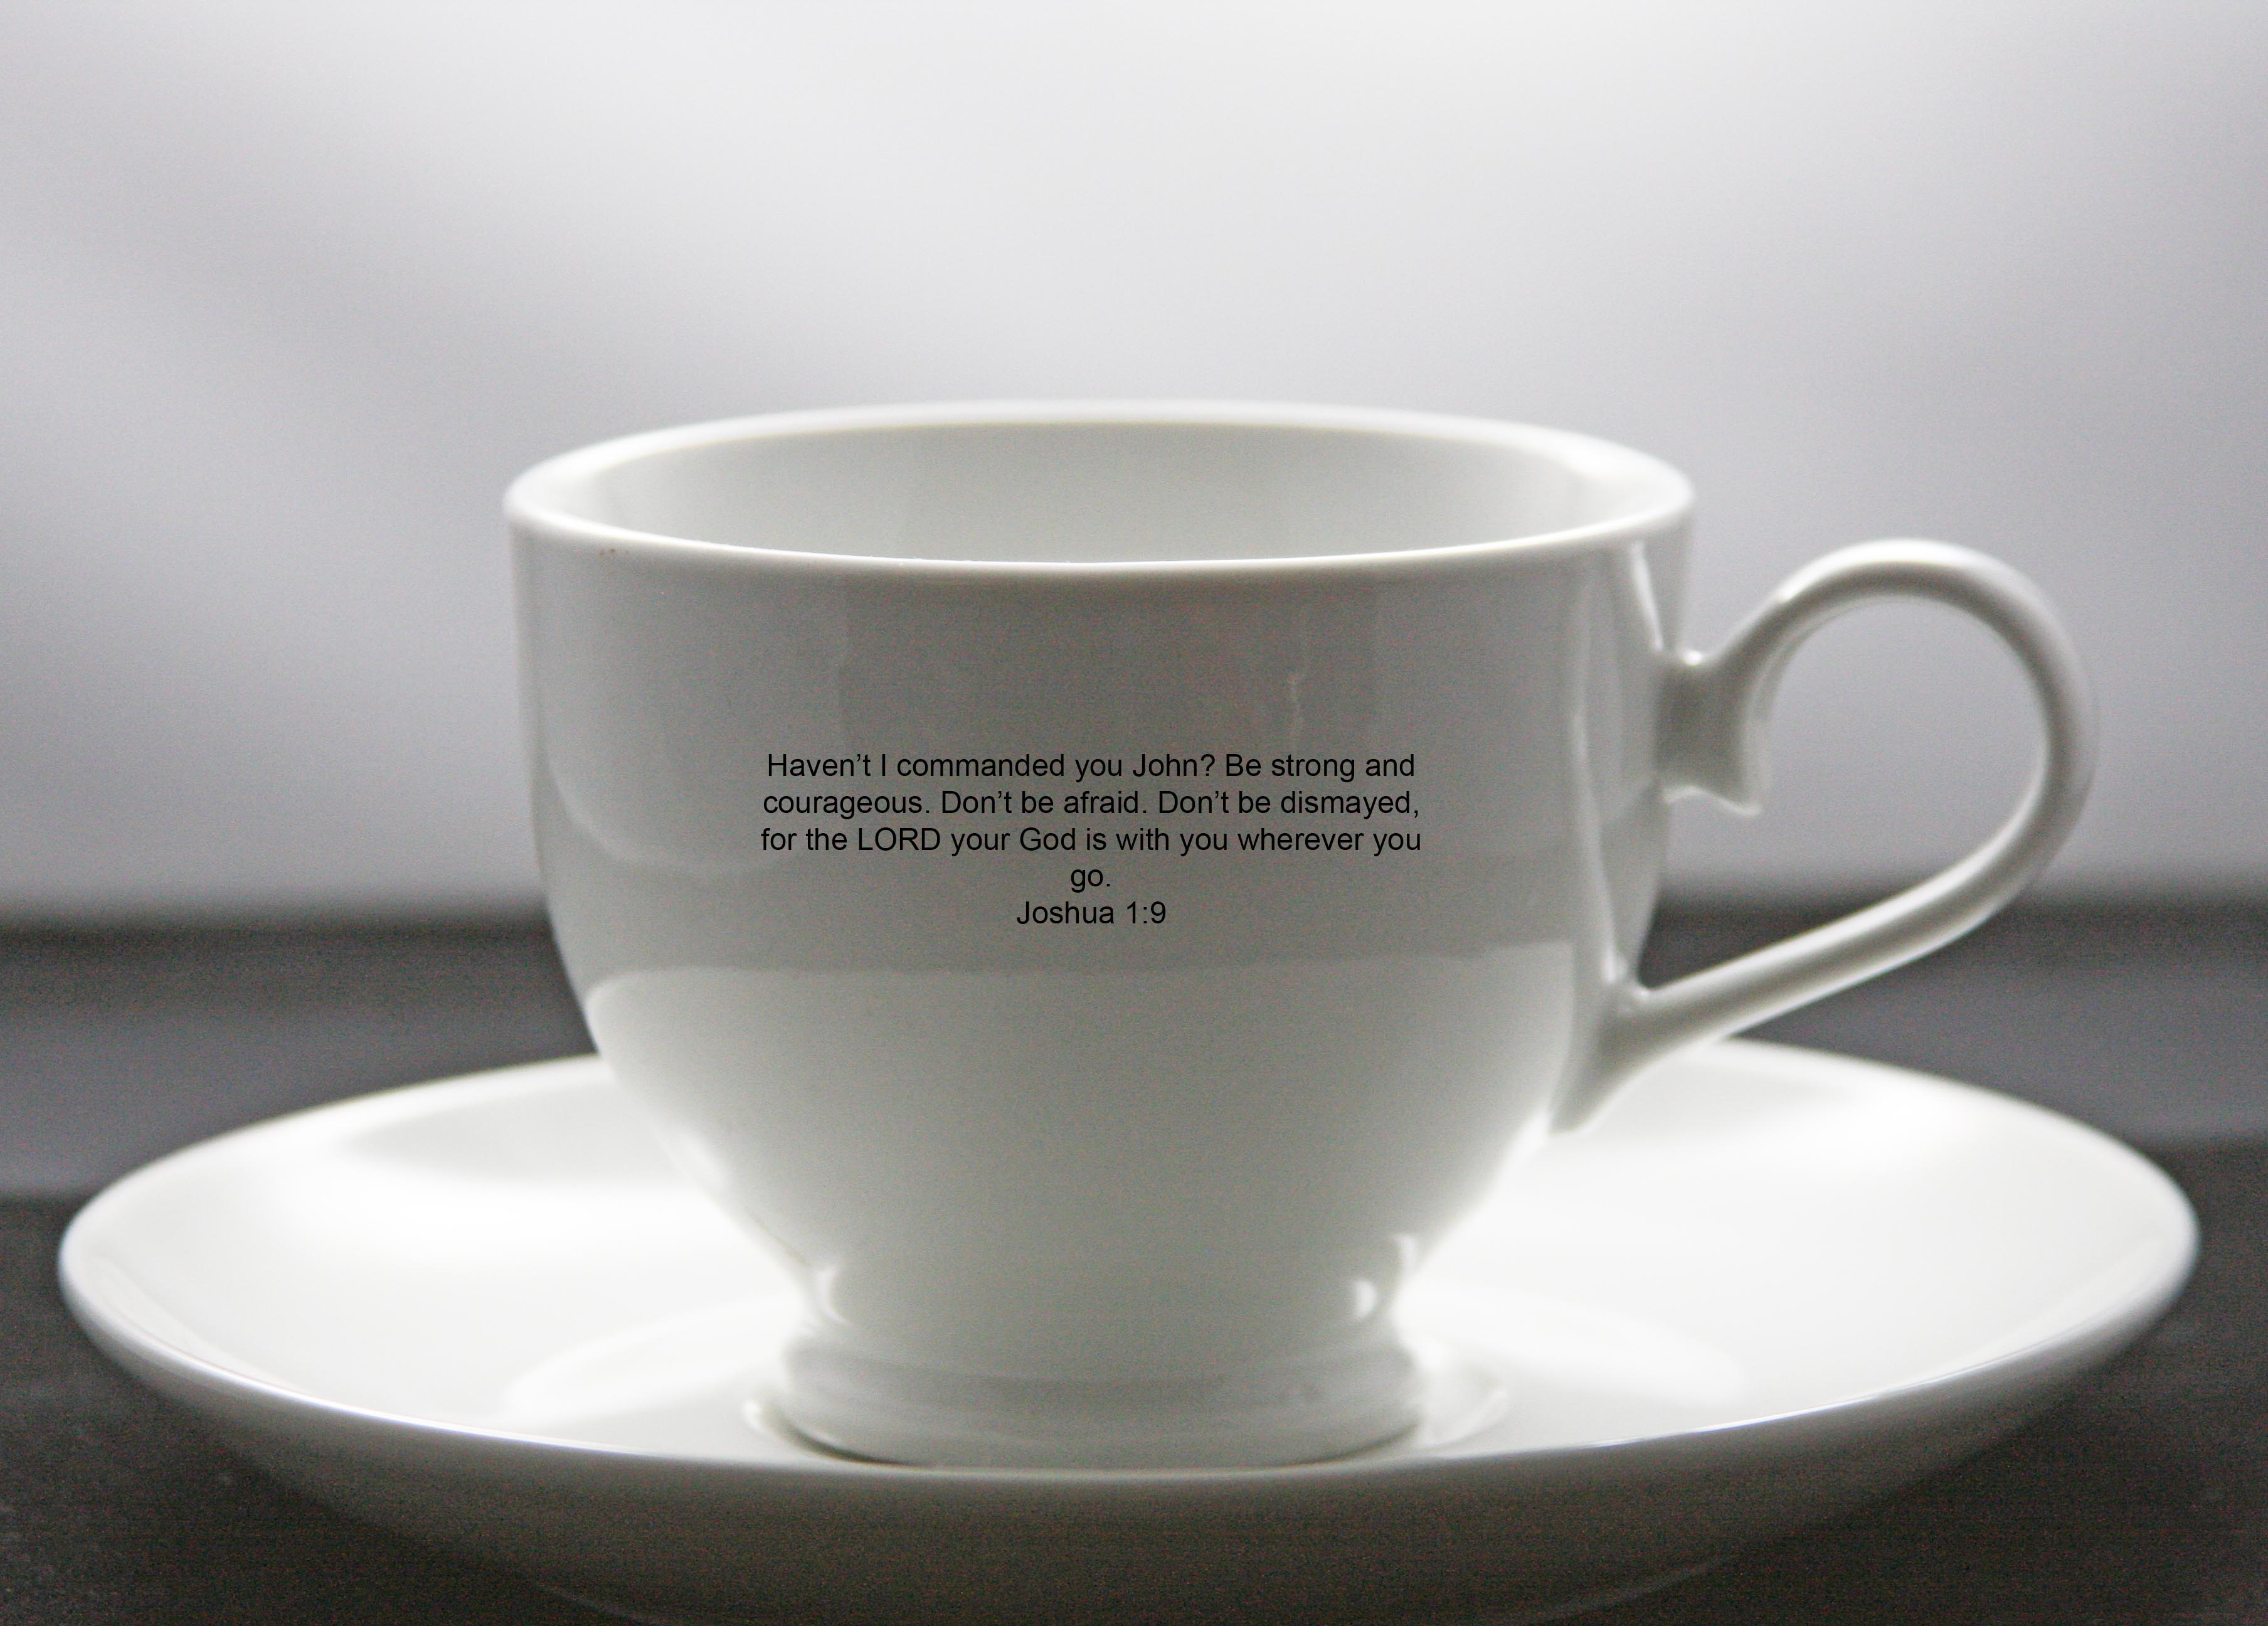 Inspirational Cup & Saucer Printed Bible Verse Joshua 1:9 with John's Name Added for Personalization